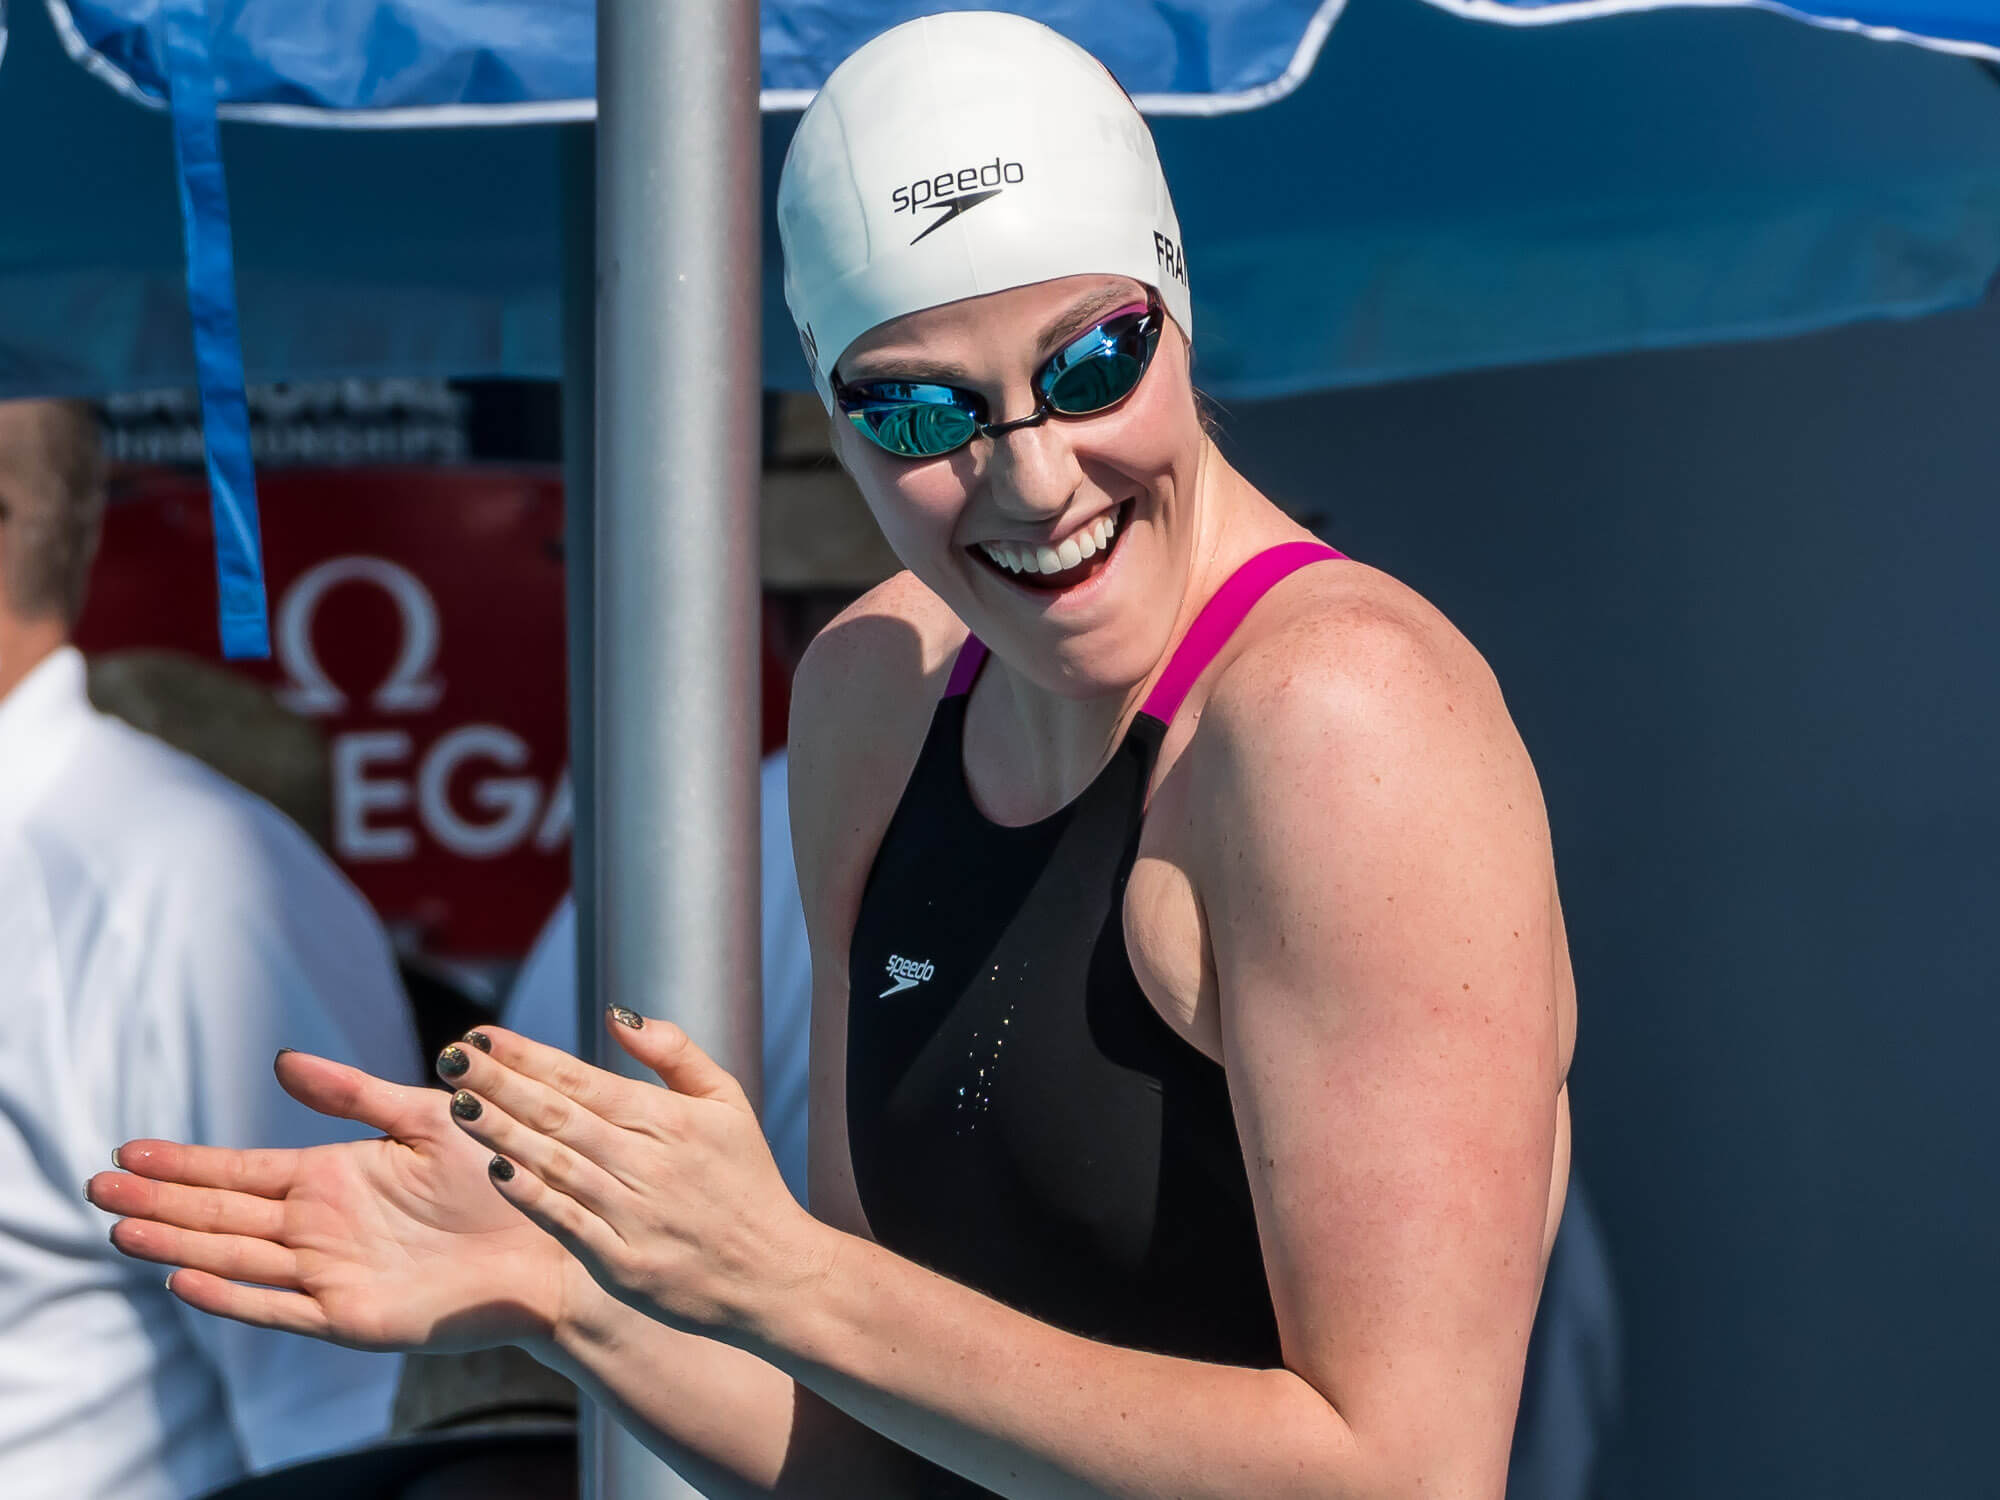 Missy Franklin, Cullen Jones, Rowdy Gaines Appear on Today Show